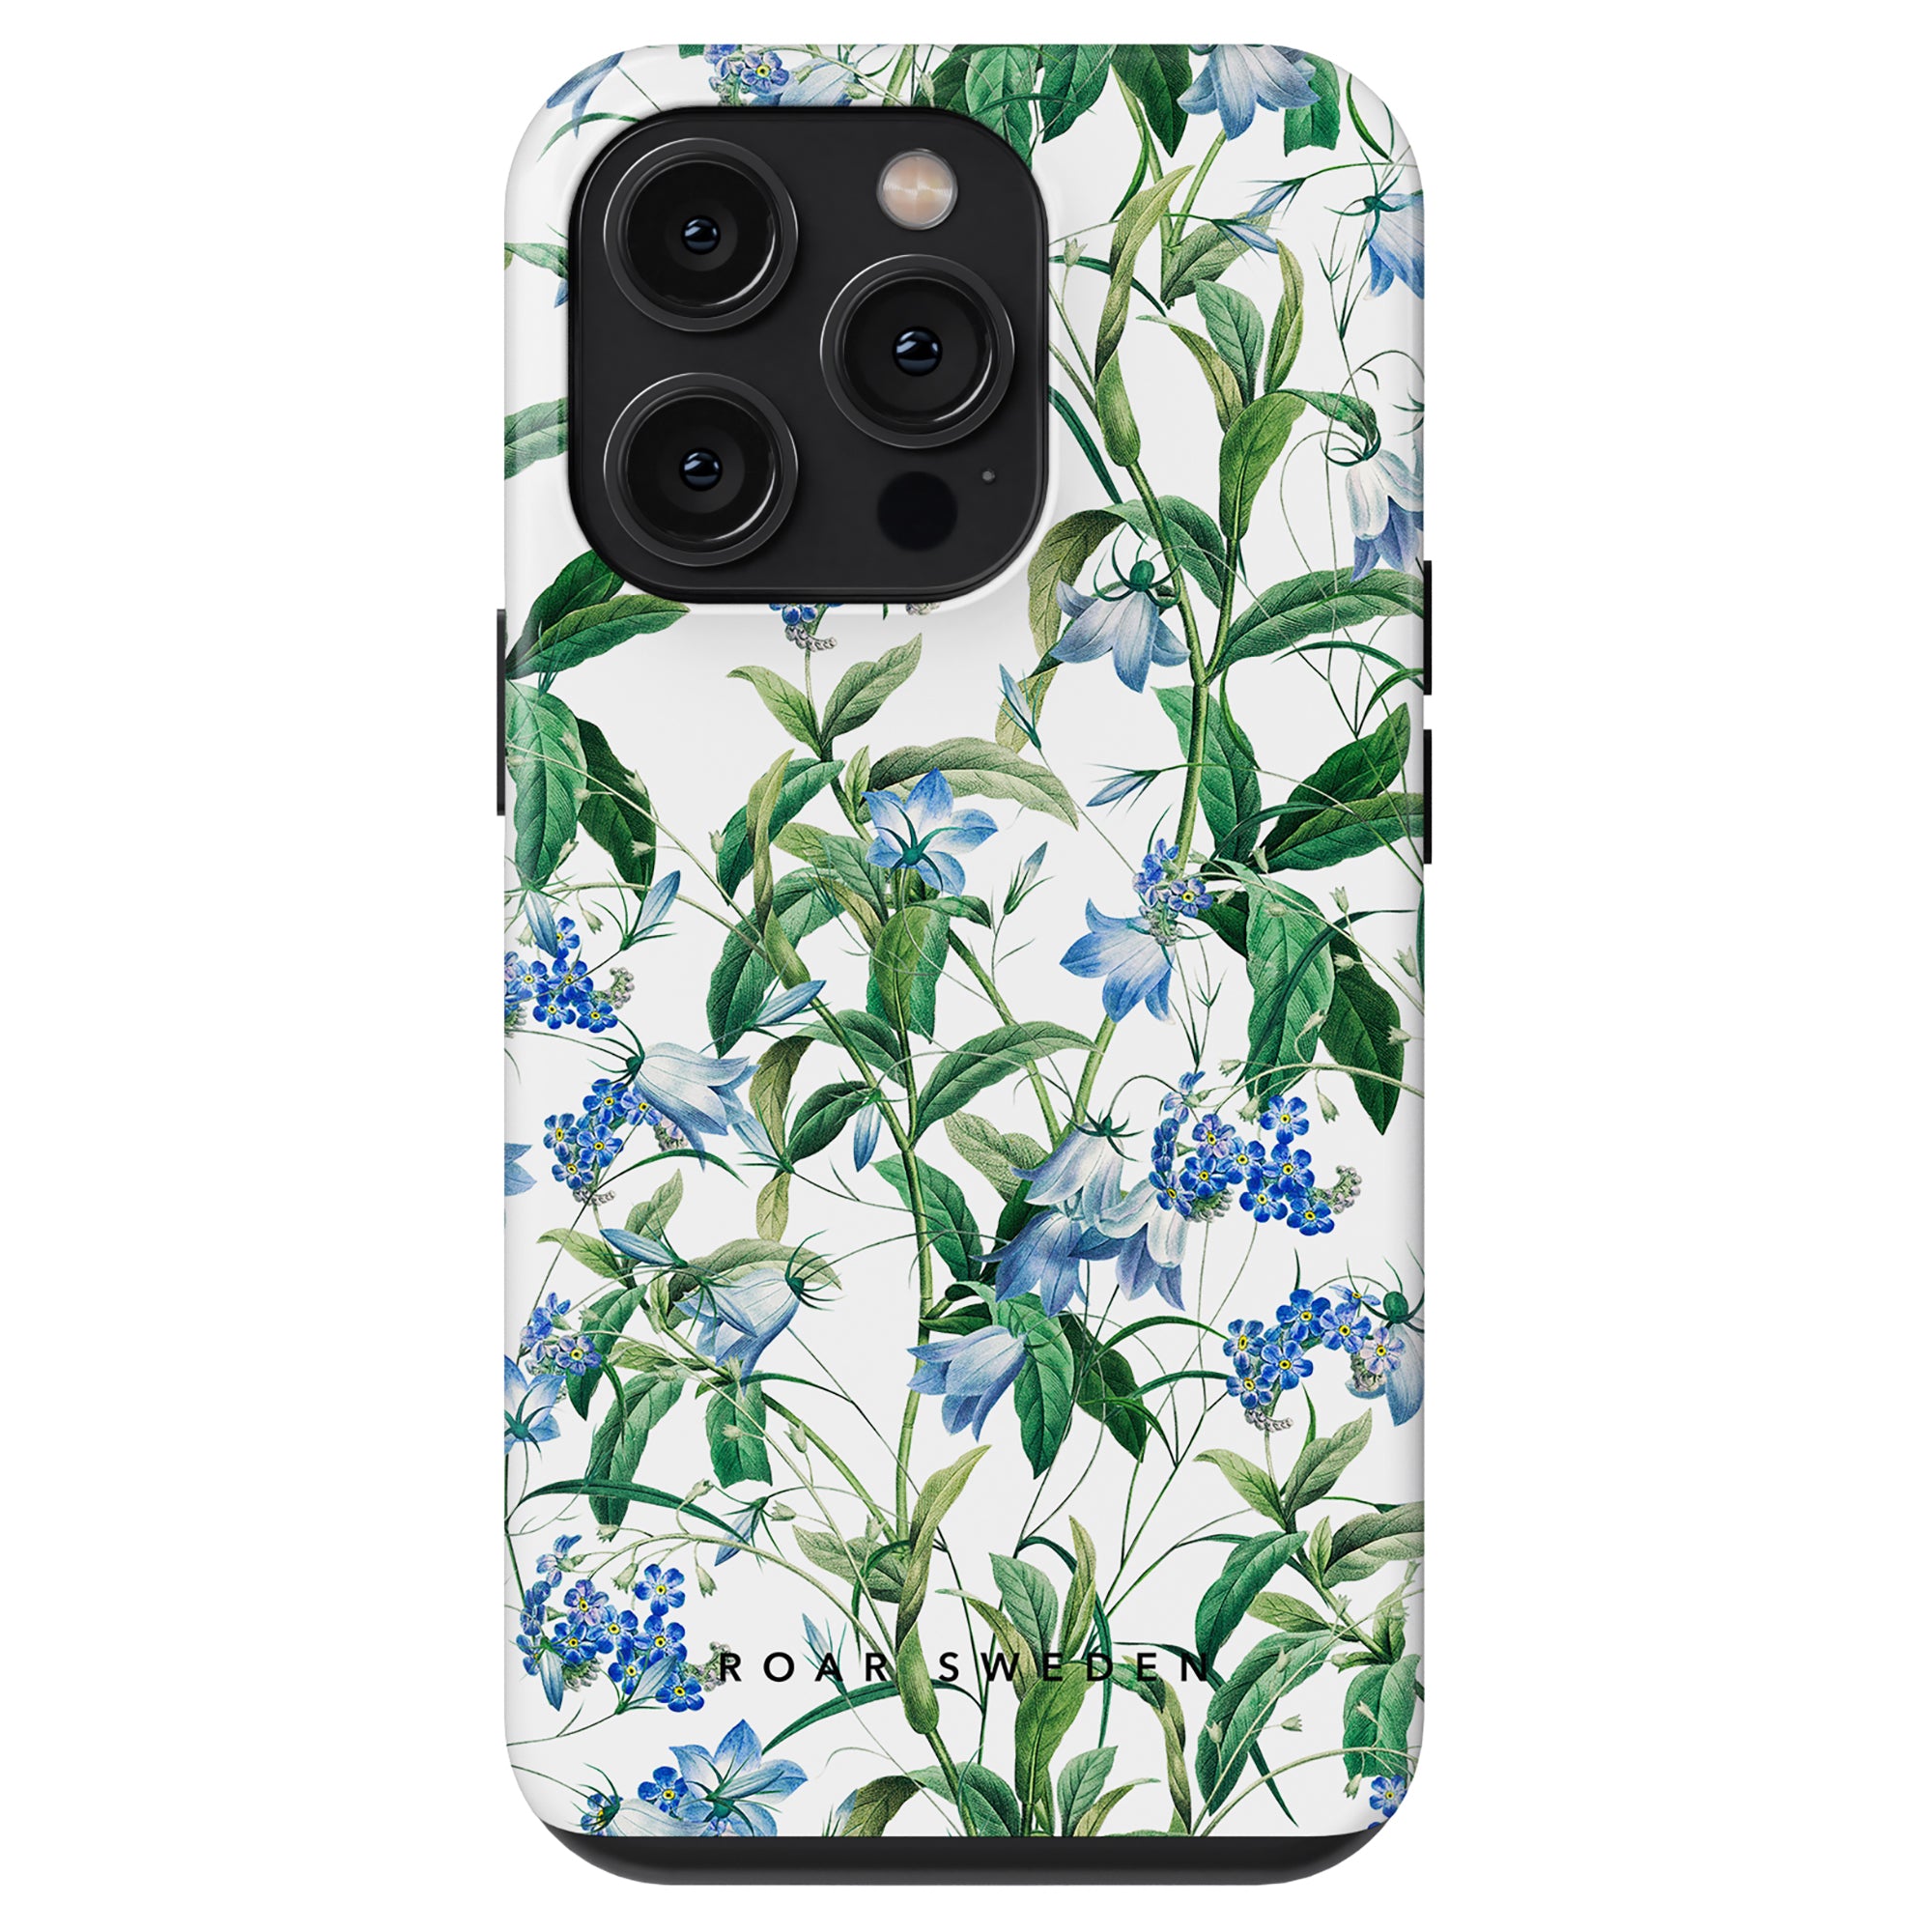 Blue Bells - Tough Case with a floral pattern, exfoliating triple-camera setup, and skincare-inspired design.